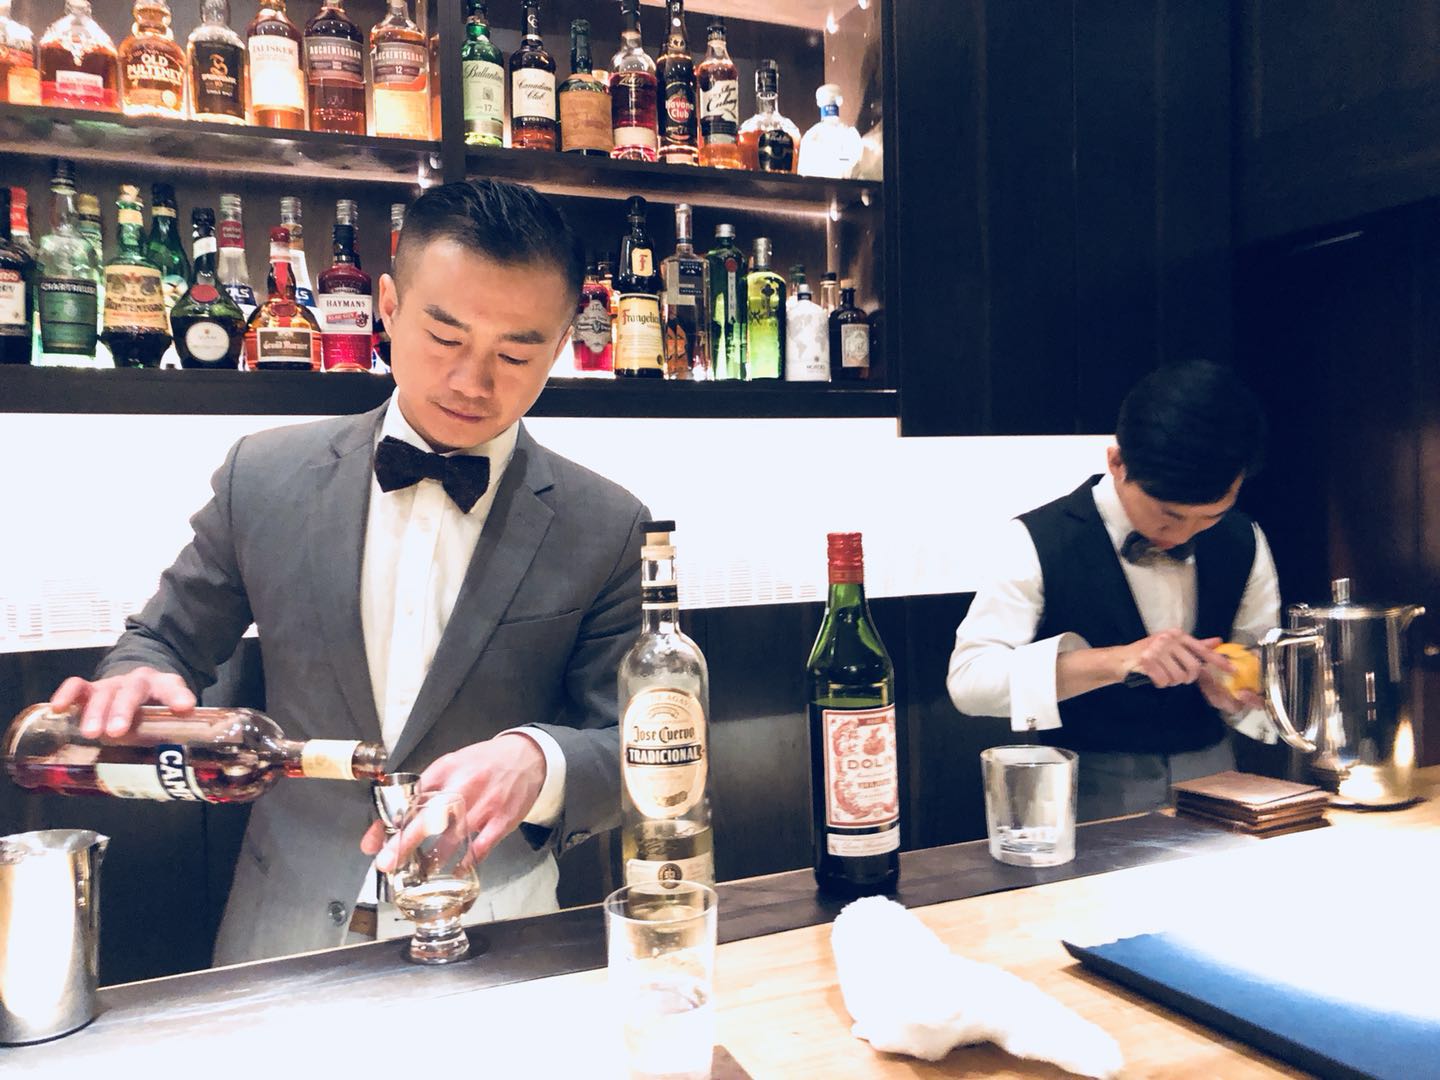 An Old Favorite of Japanese Expats, Bar Roost Serves Up Classic Cocktails With a Twist